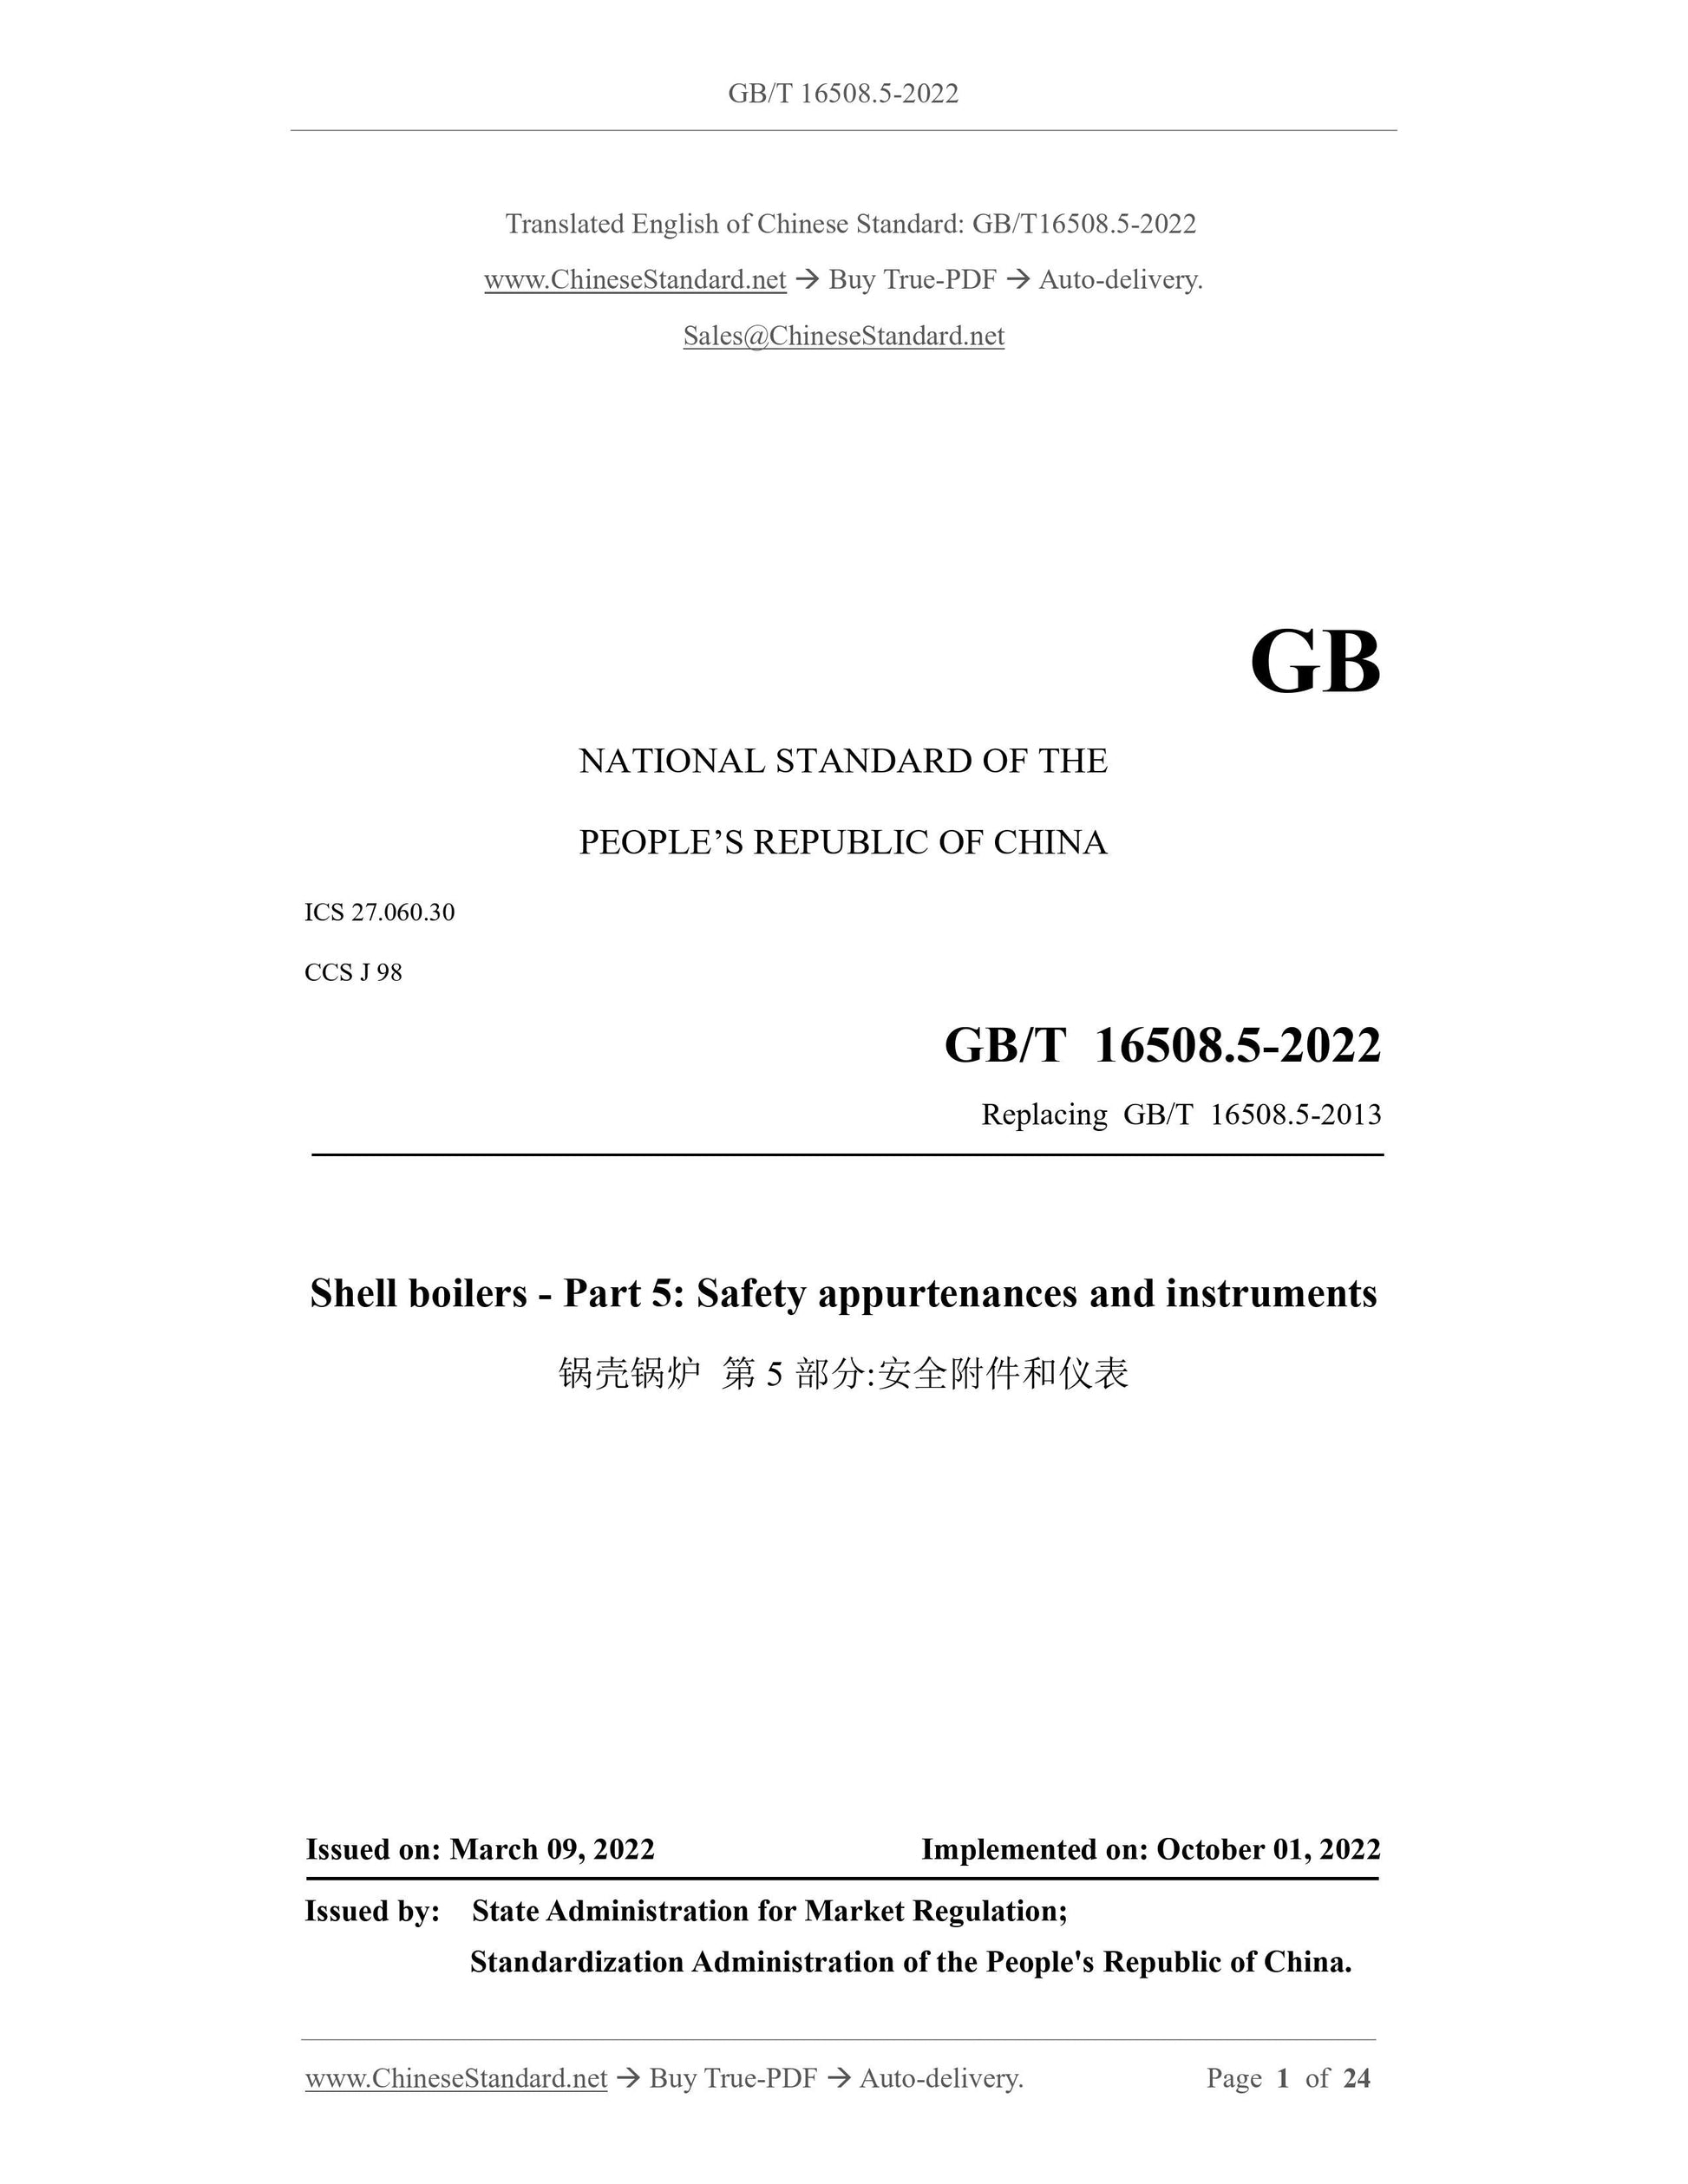 GB/T 16508.5-2022 Page 1